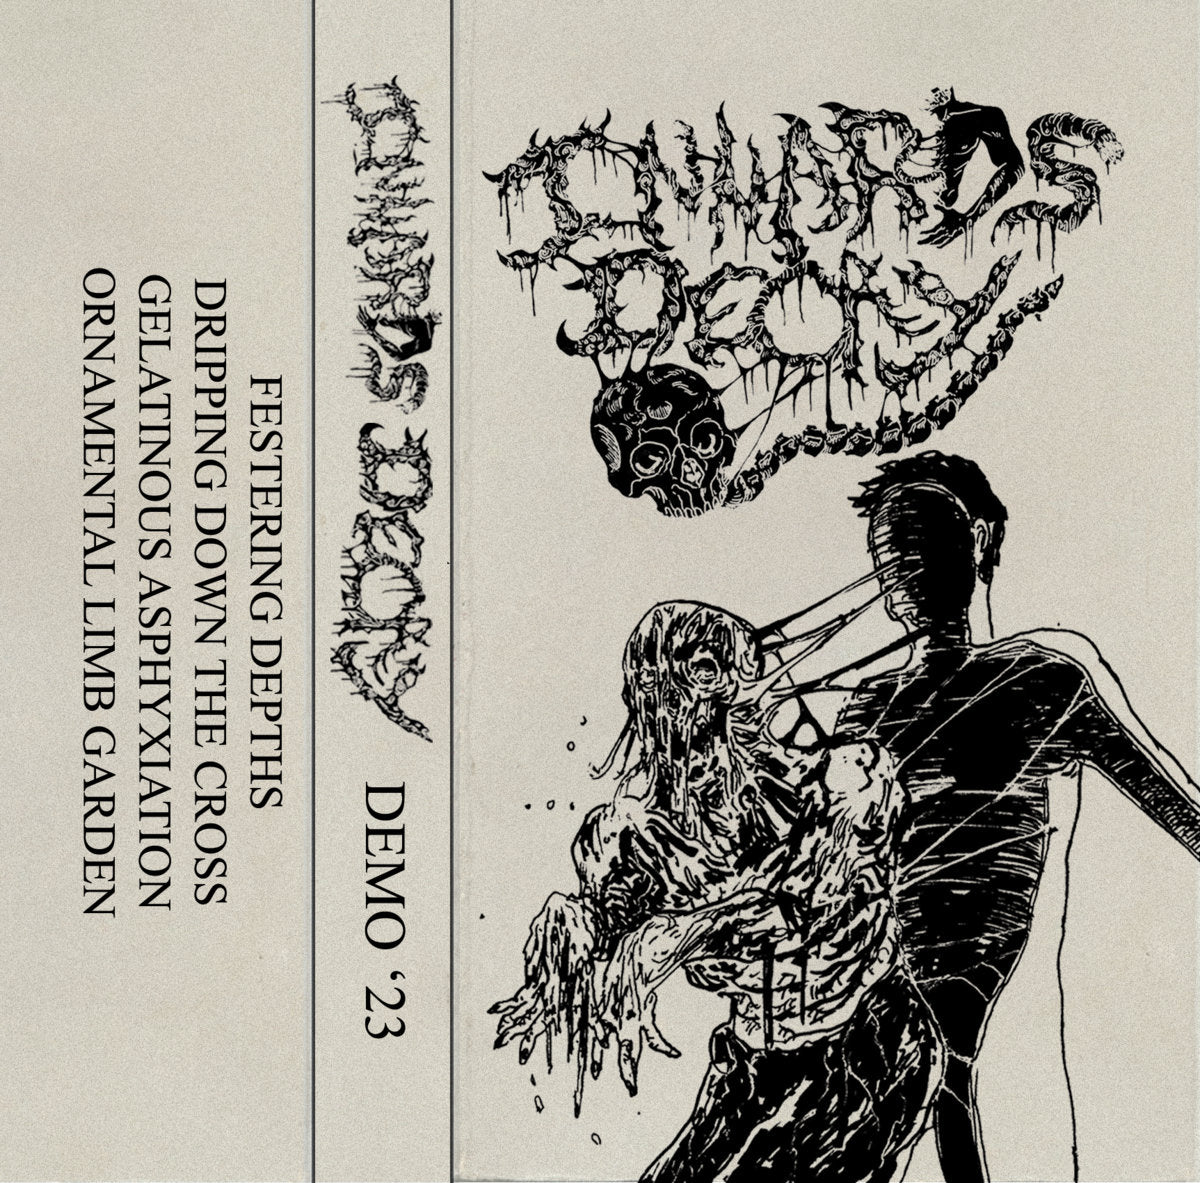 Innards Decay "Demo 23'" Tape     Rancid, proud, obvious worship of the gore obsessive greats.